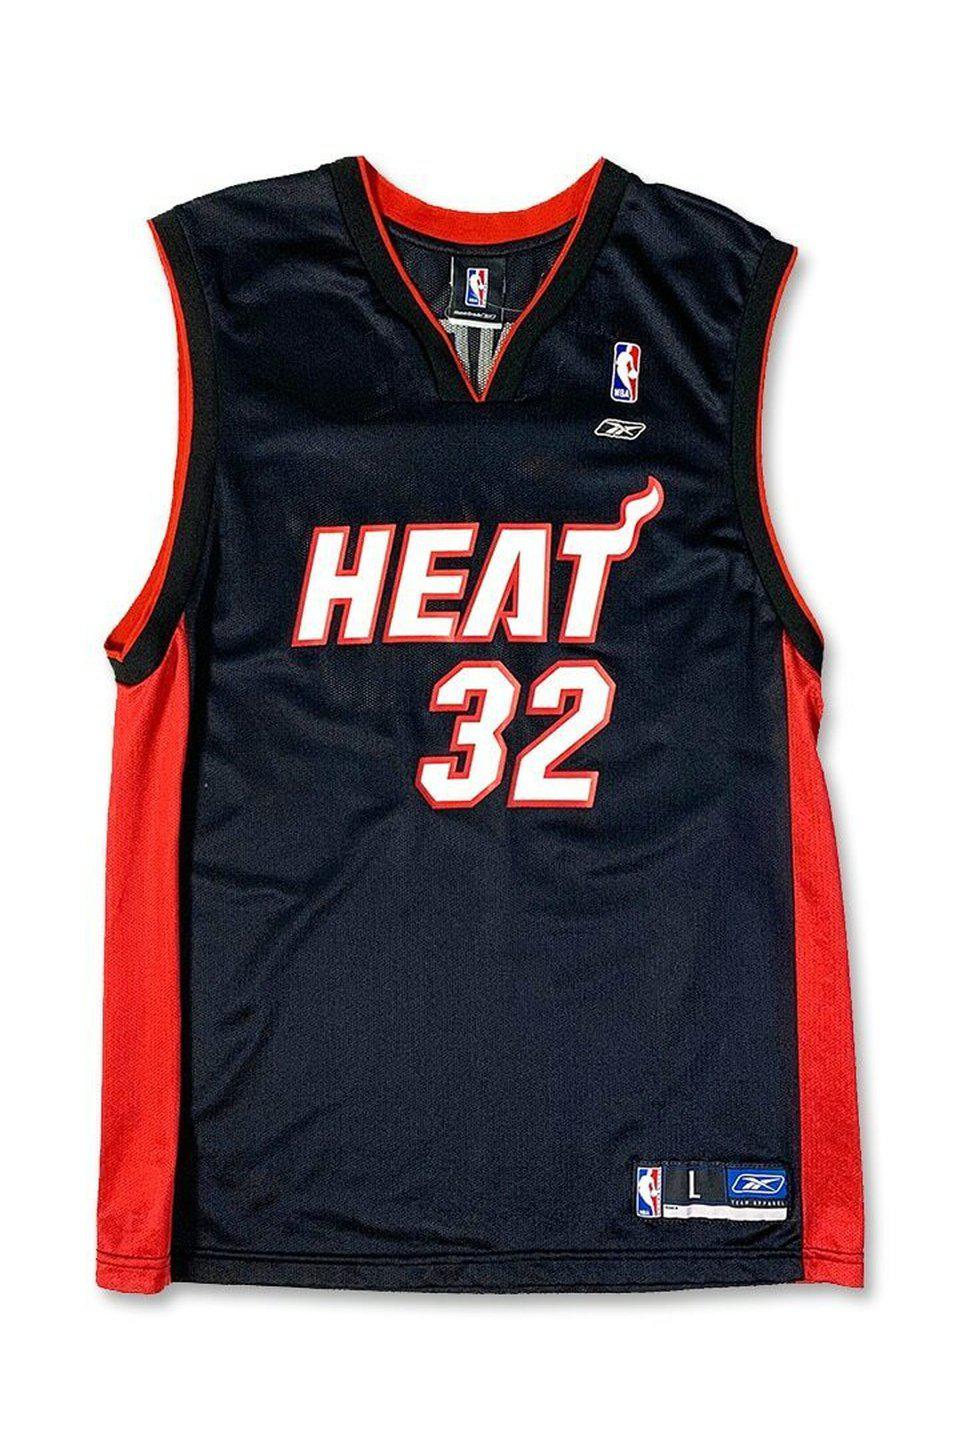 Shaquille O'Neal Apparel, Shaquille O'Neal Miami Heat Jerseys